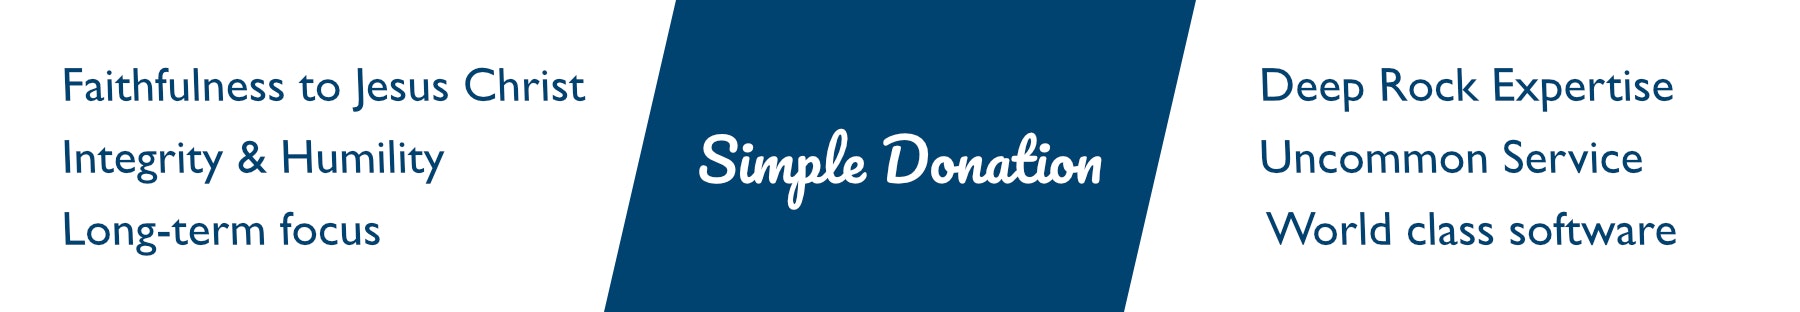 Using RockRMS to Foster Generosity - by Simple Donation